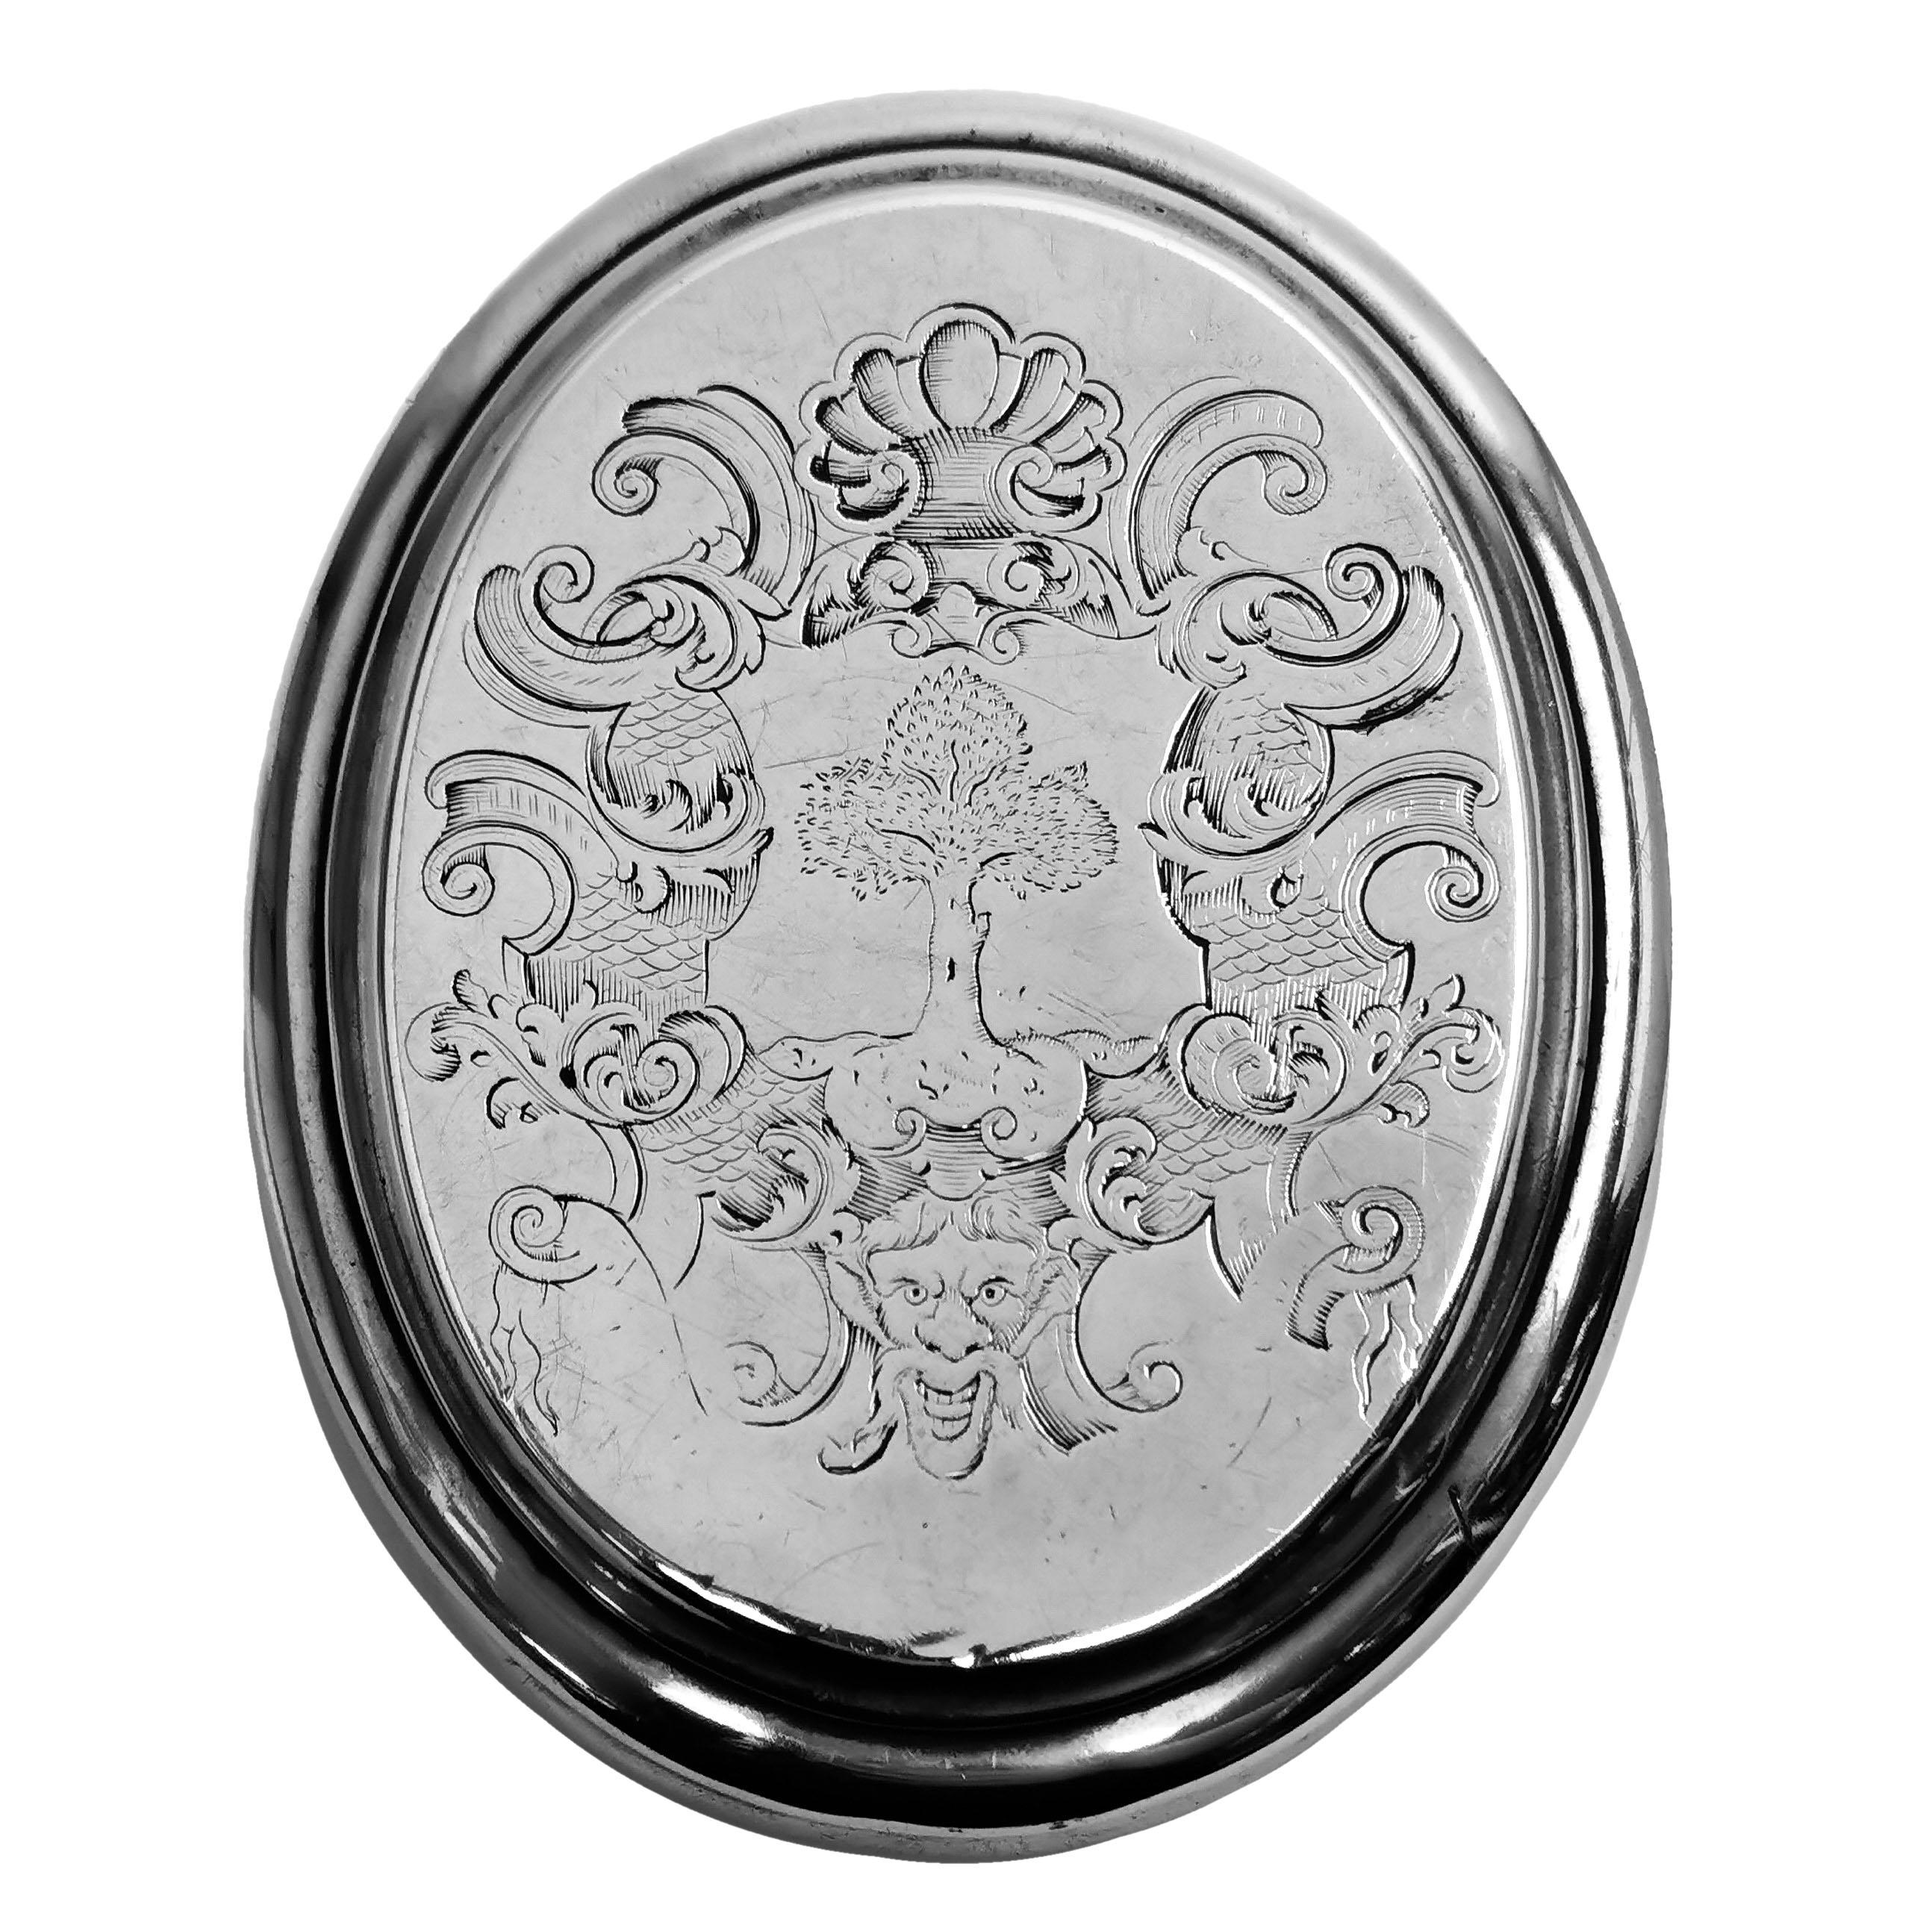 A beautiful antique Queen Anne solid silver tobacco box with a classic oval form. The fitted lid has an intricate engraved armorial, and the interior is gilded.

Made in London, England in 1711 by Edward Cornock

Weight - 130g
Length -